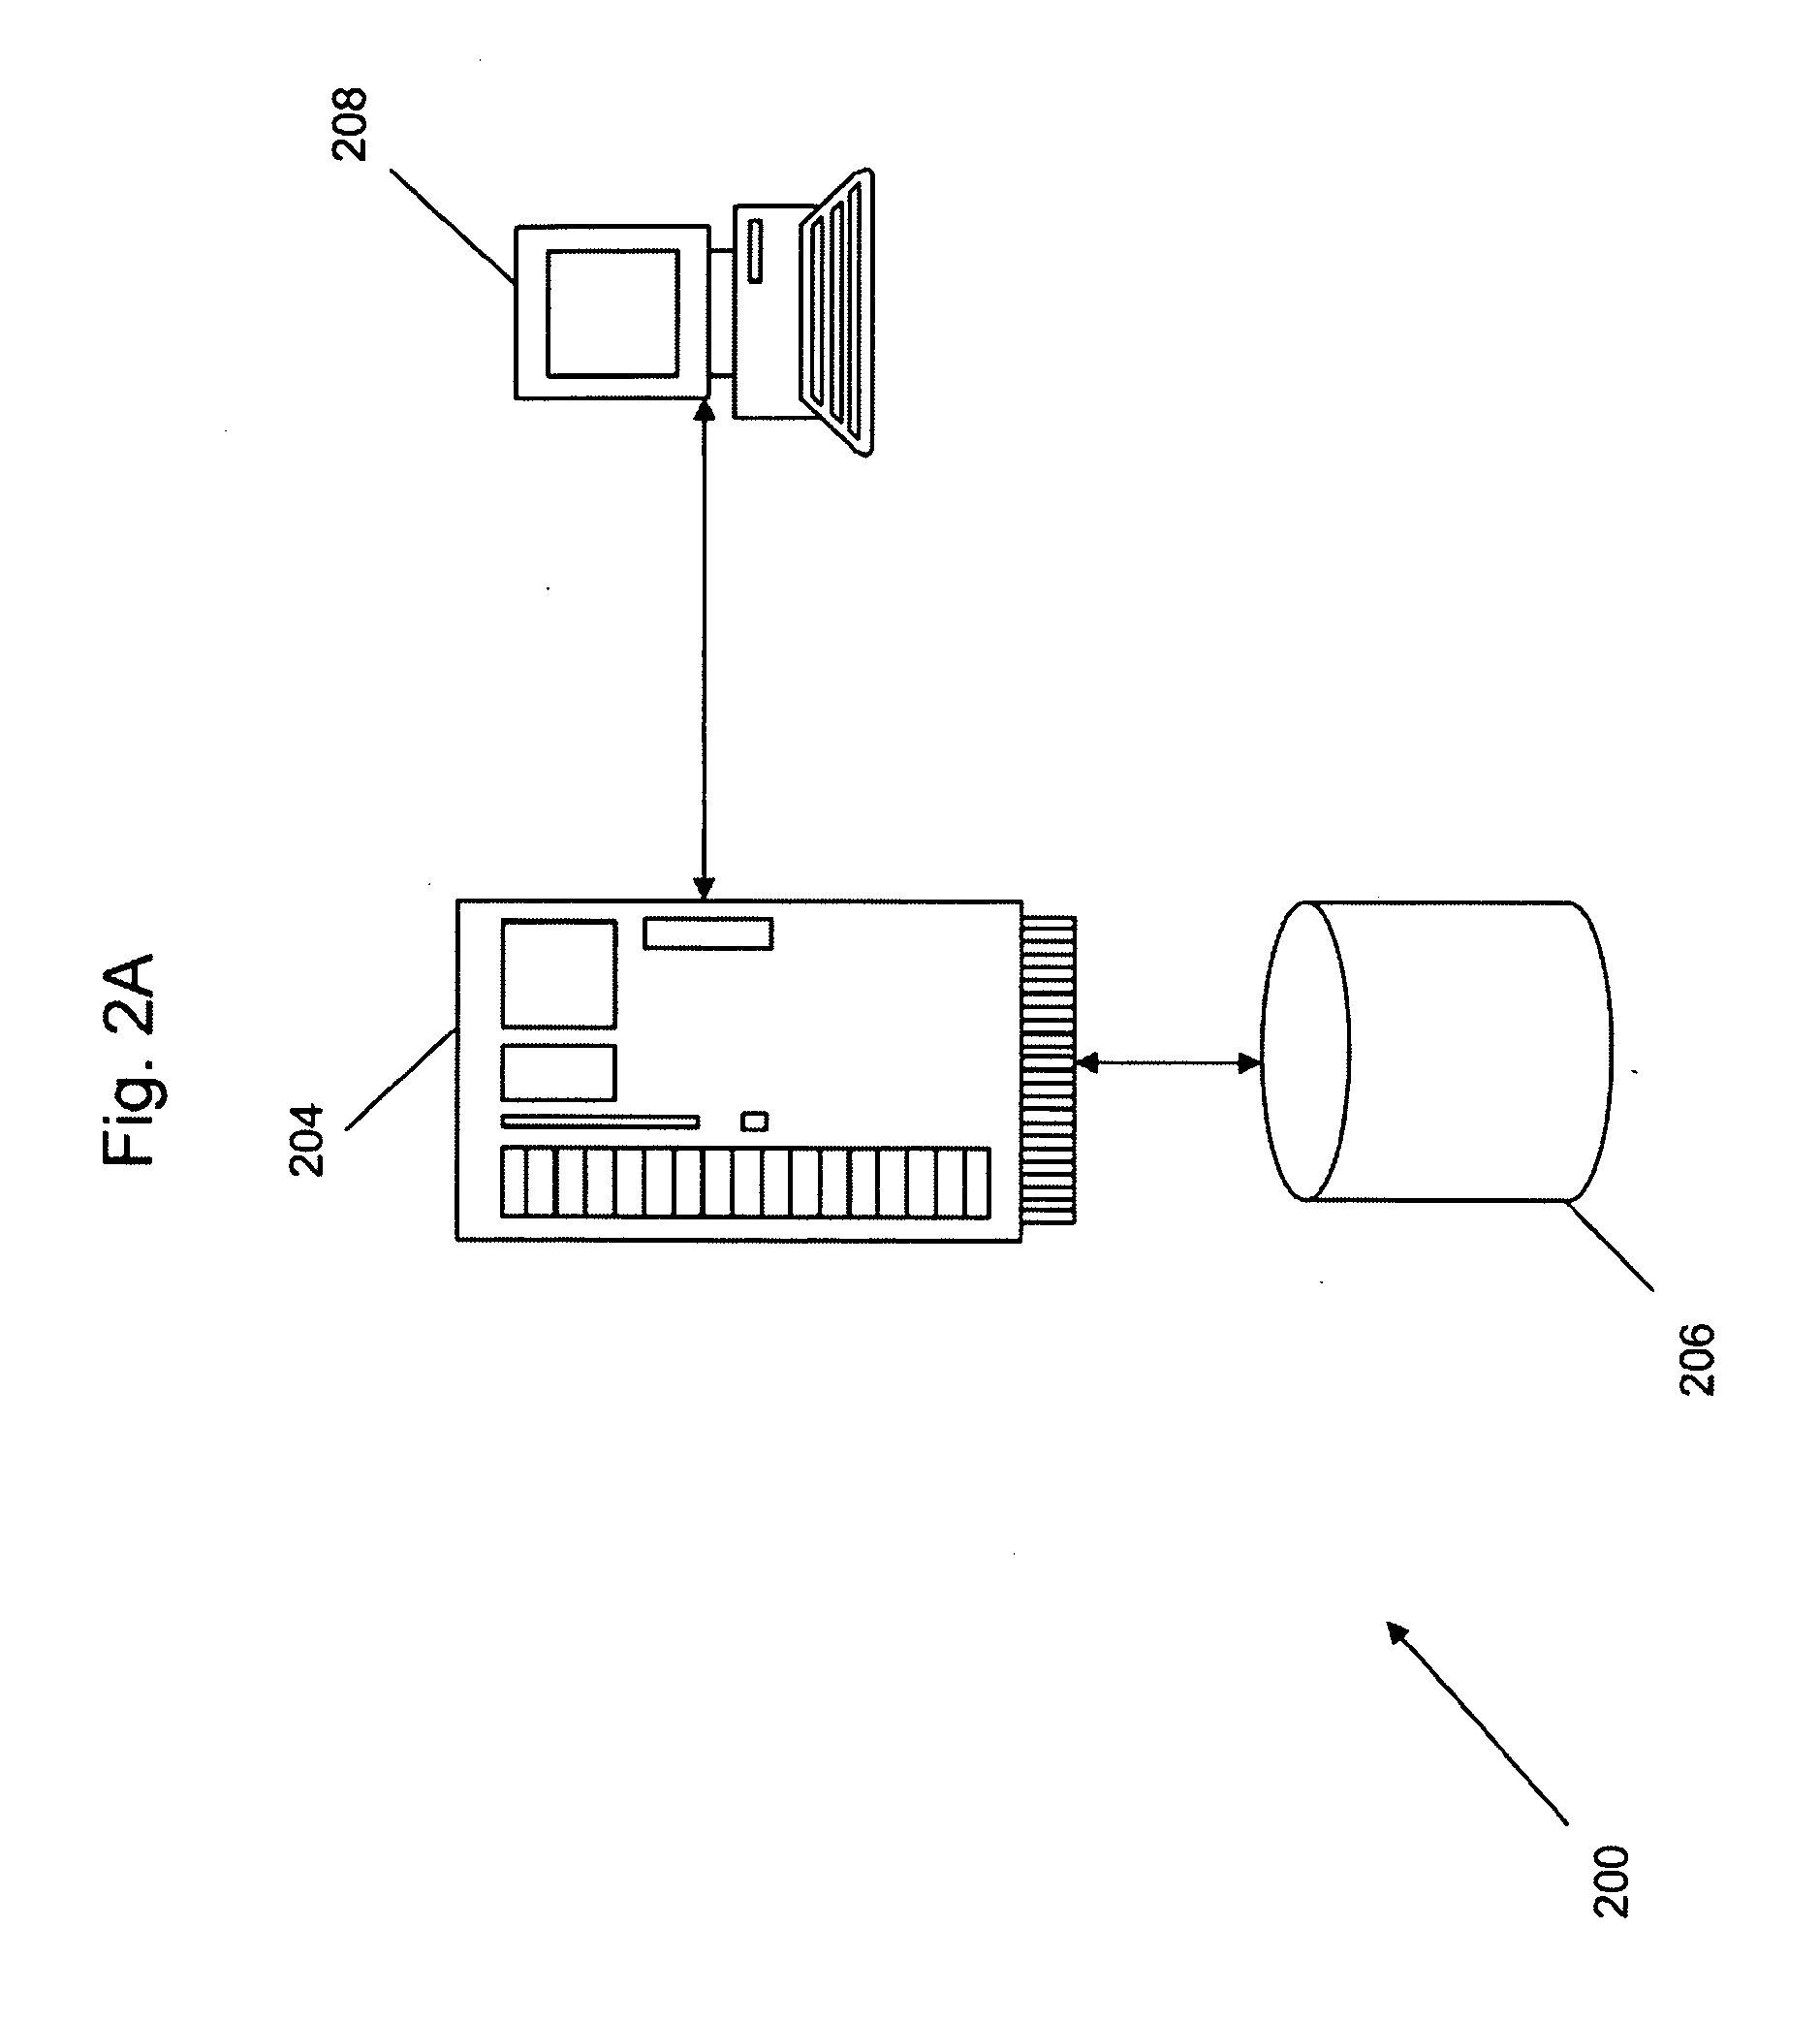 Method and system for implementing performance kits